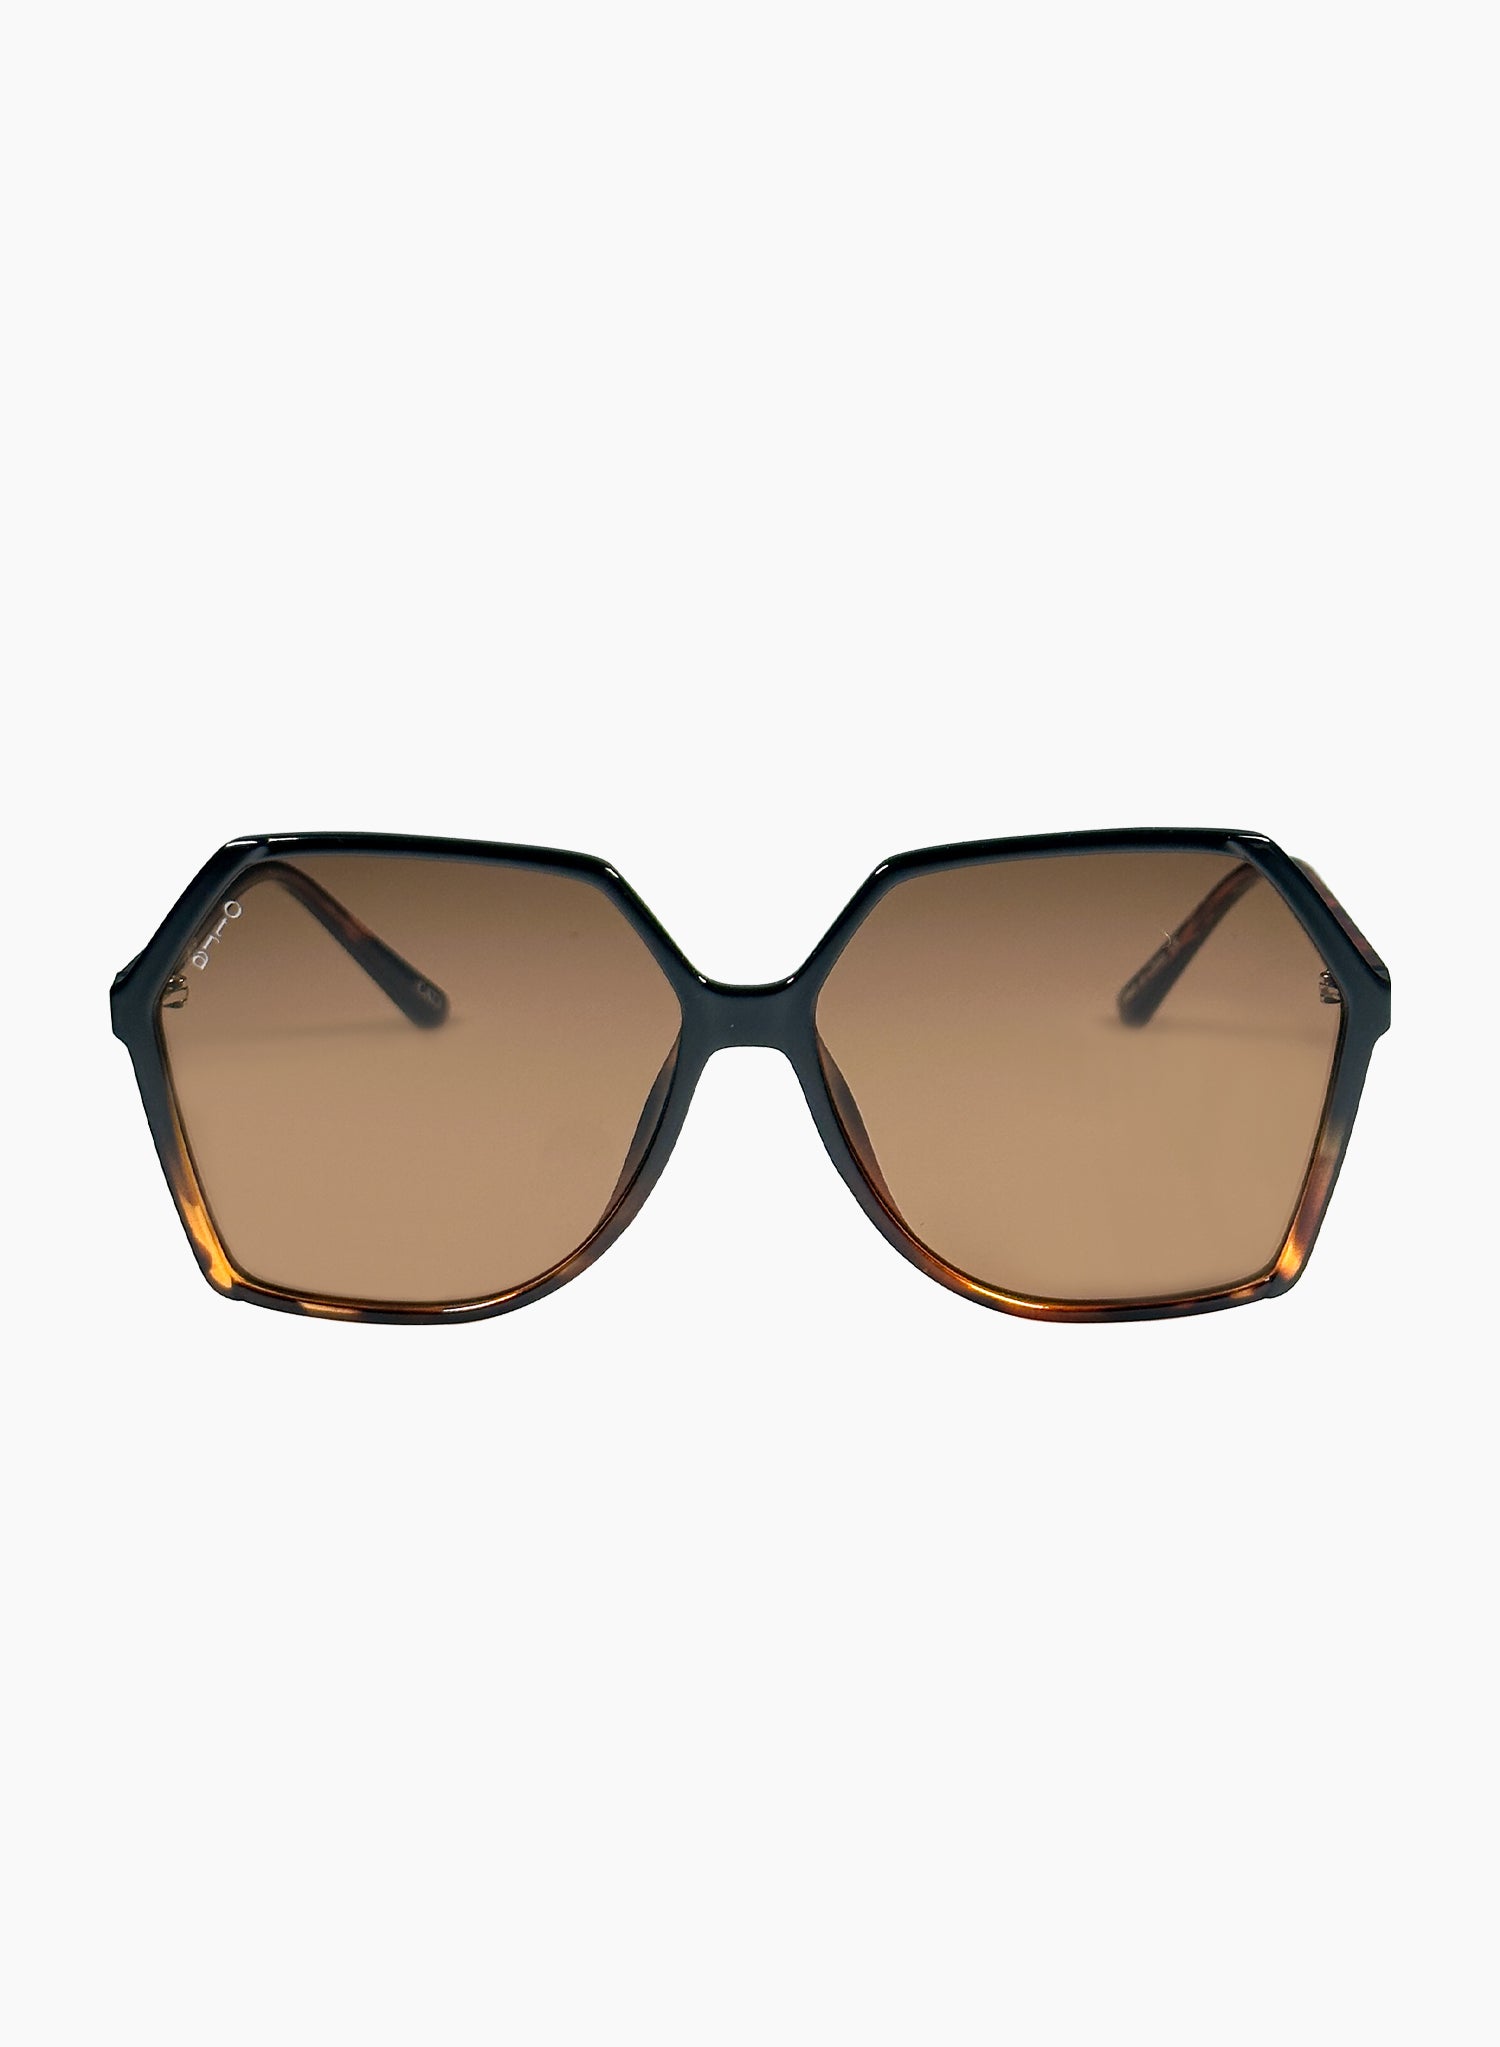 CHANEL Rectangular Sunglasses CH4267 Pale Gold/Brown